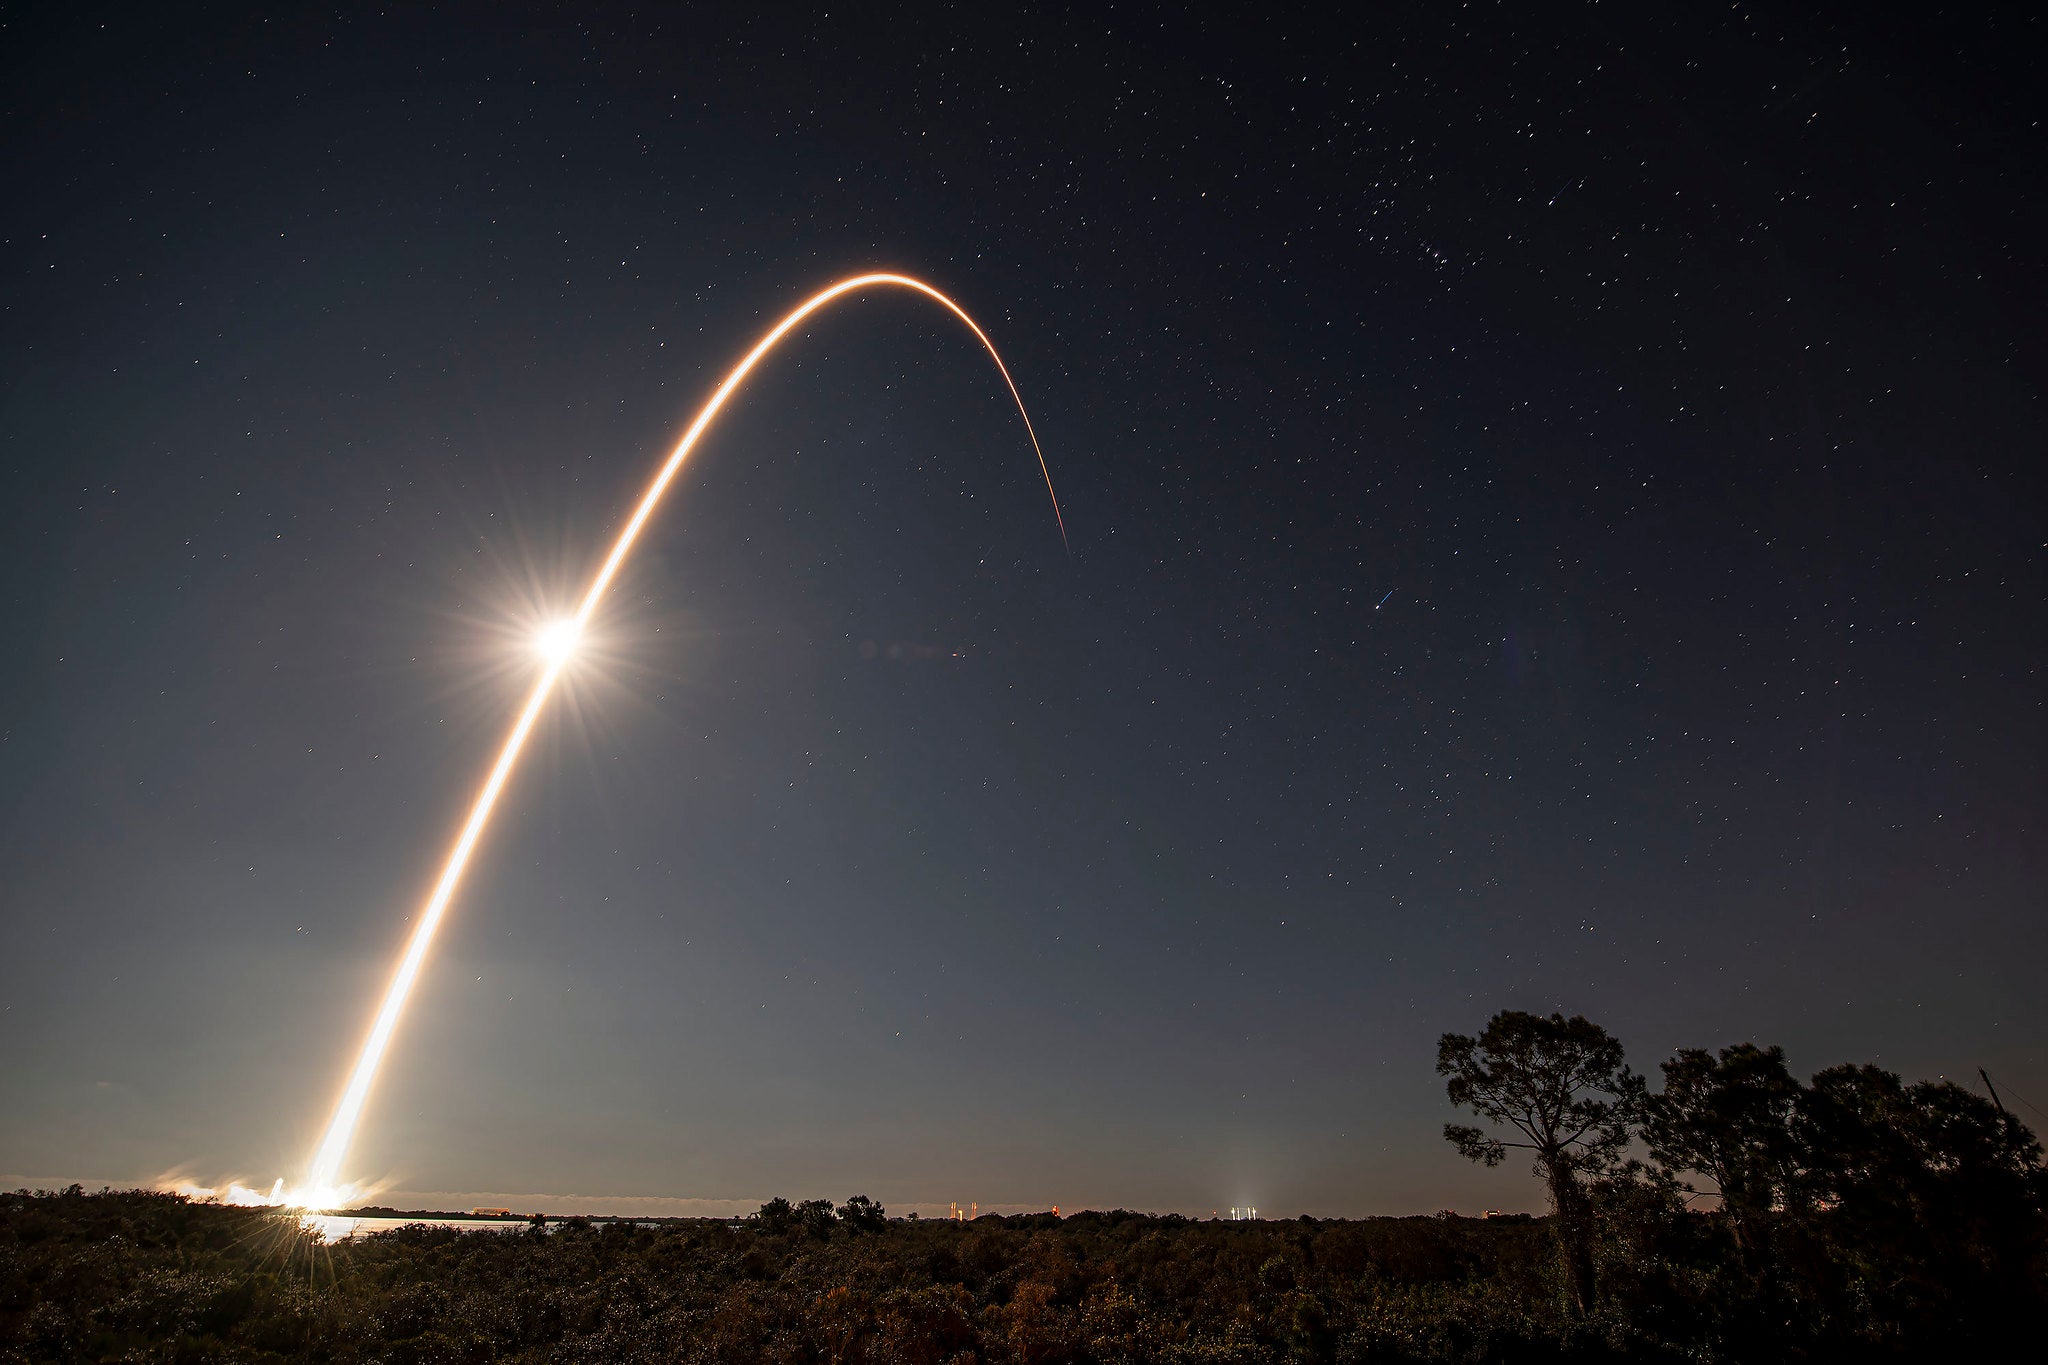 Launch of a SpaceX Falcon 9 rocket with 49 Starlink satellites on board, as imaged on January 18, 2022.  (Photo: SpaceX)